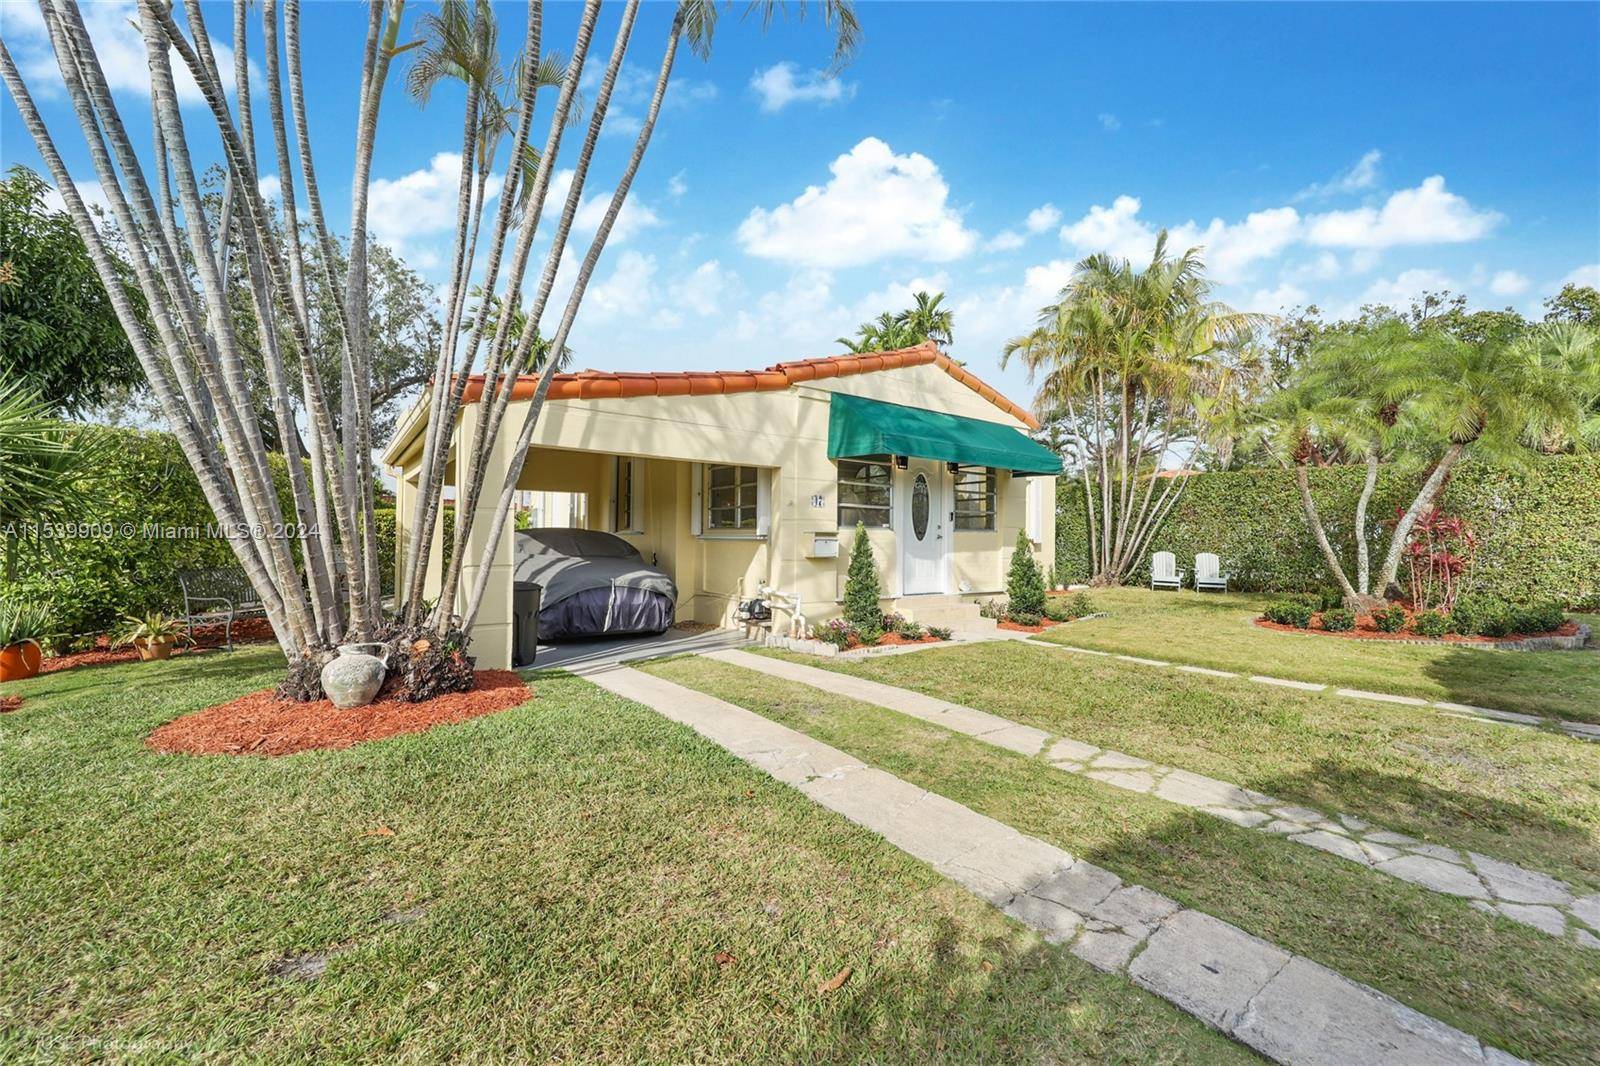 Beautiful one story home with 3 bedrooms and 2 baths, located on a wide street in Coral Gables.